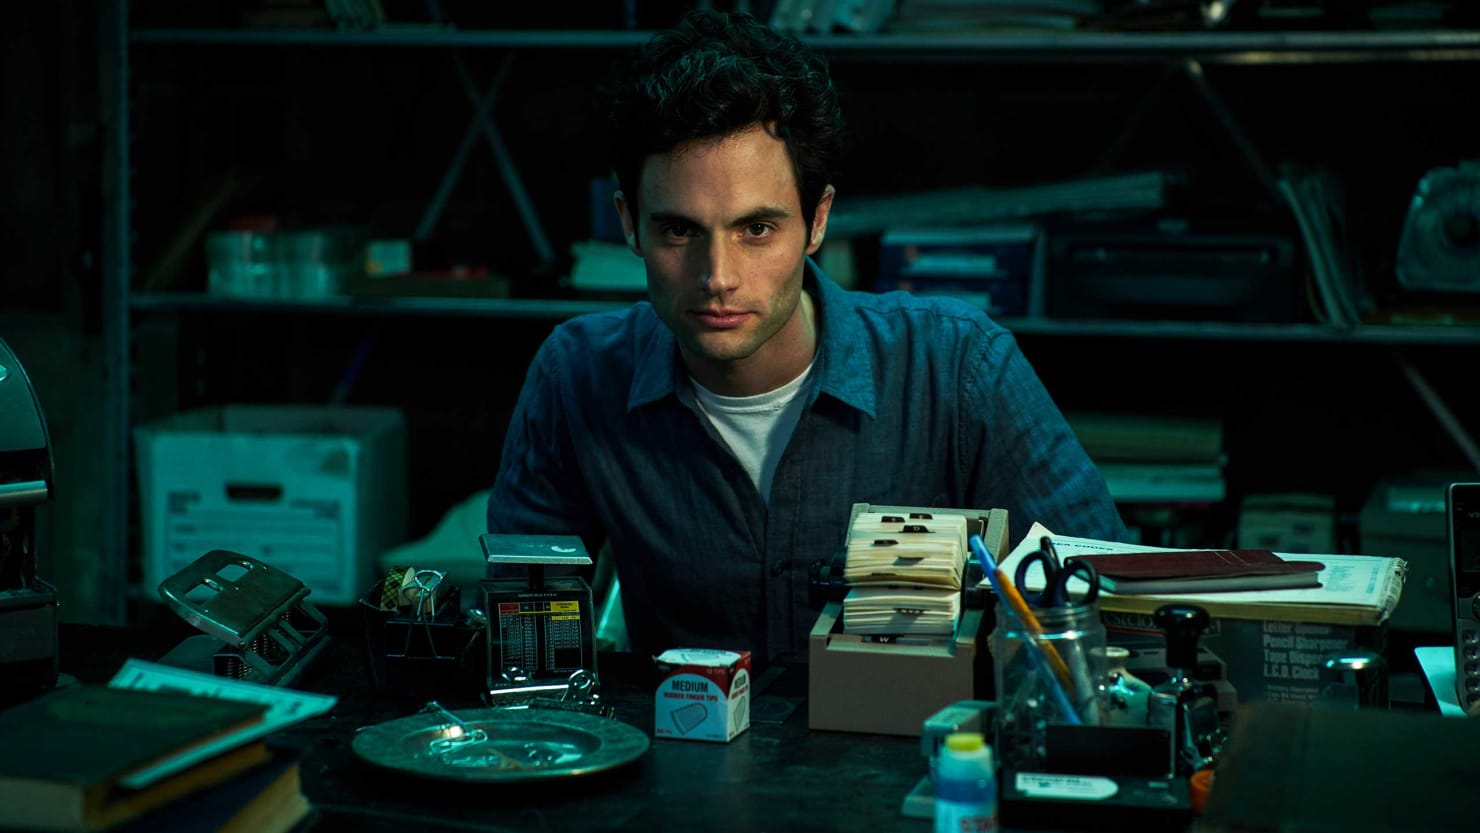 Penn Badgley on His Twisted Stalker in 'You' and the Dark Side of...